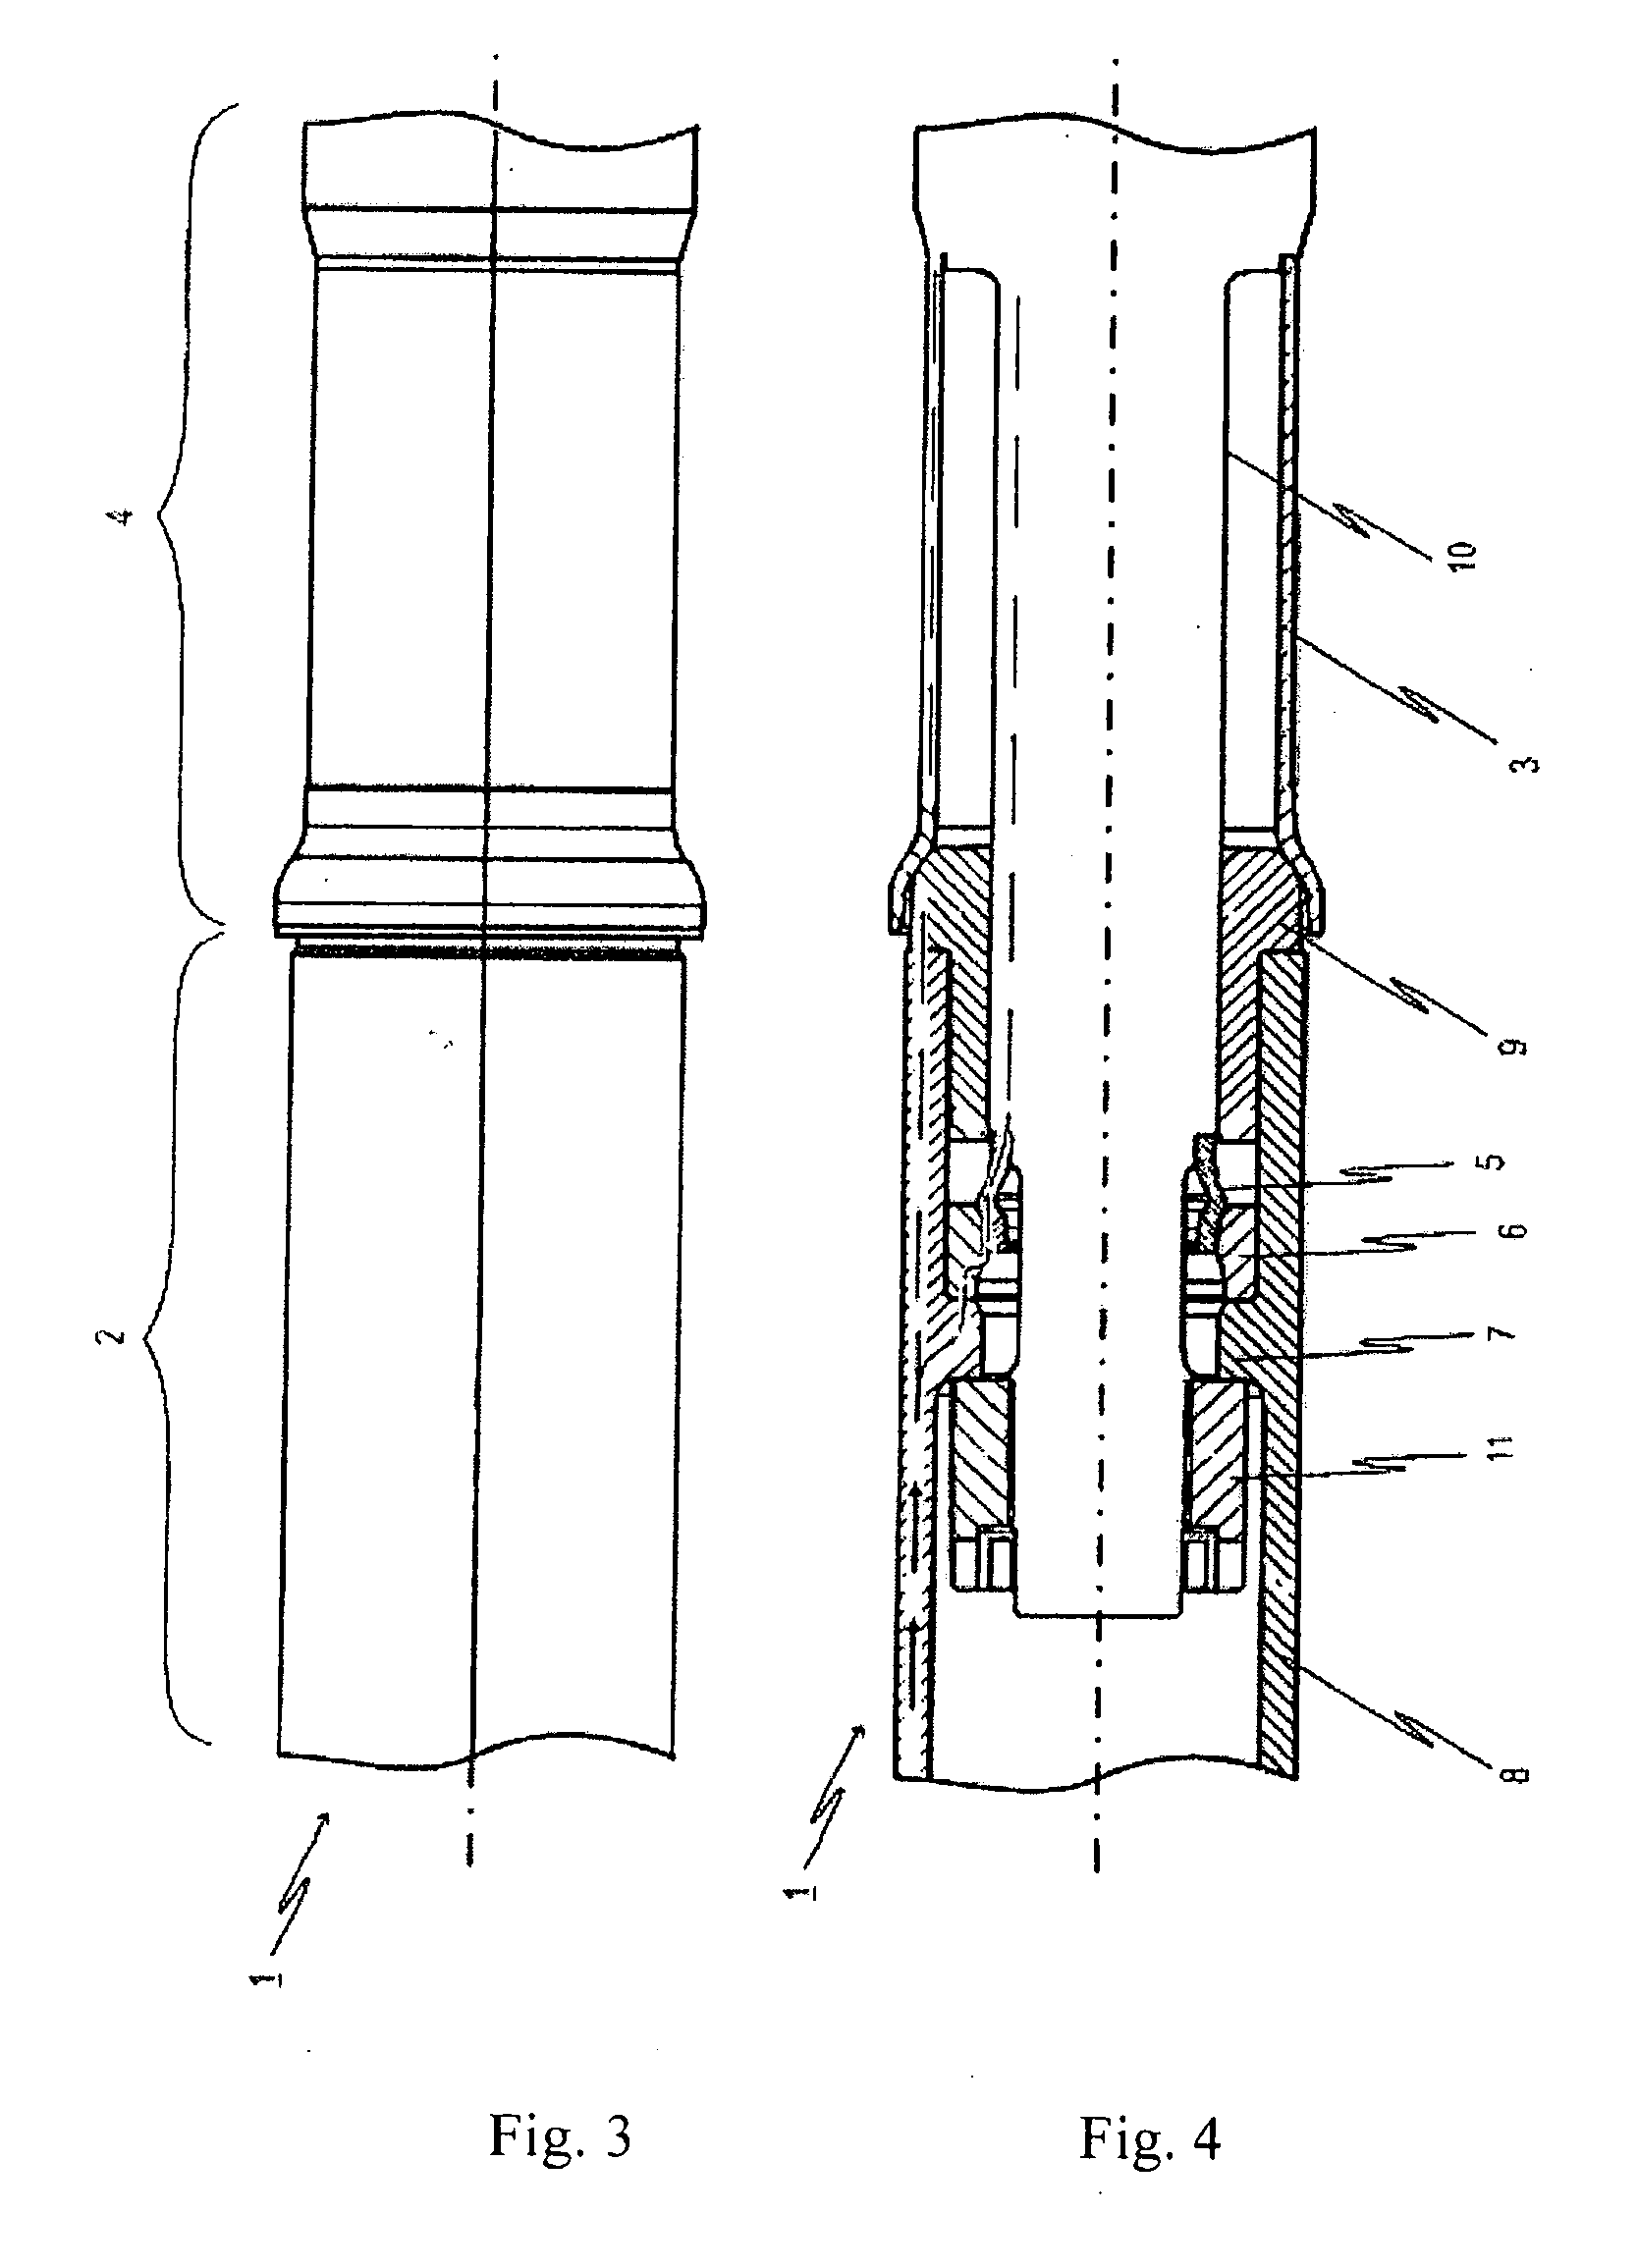 Energy dissipation device with elevated action force